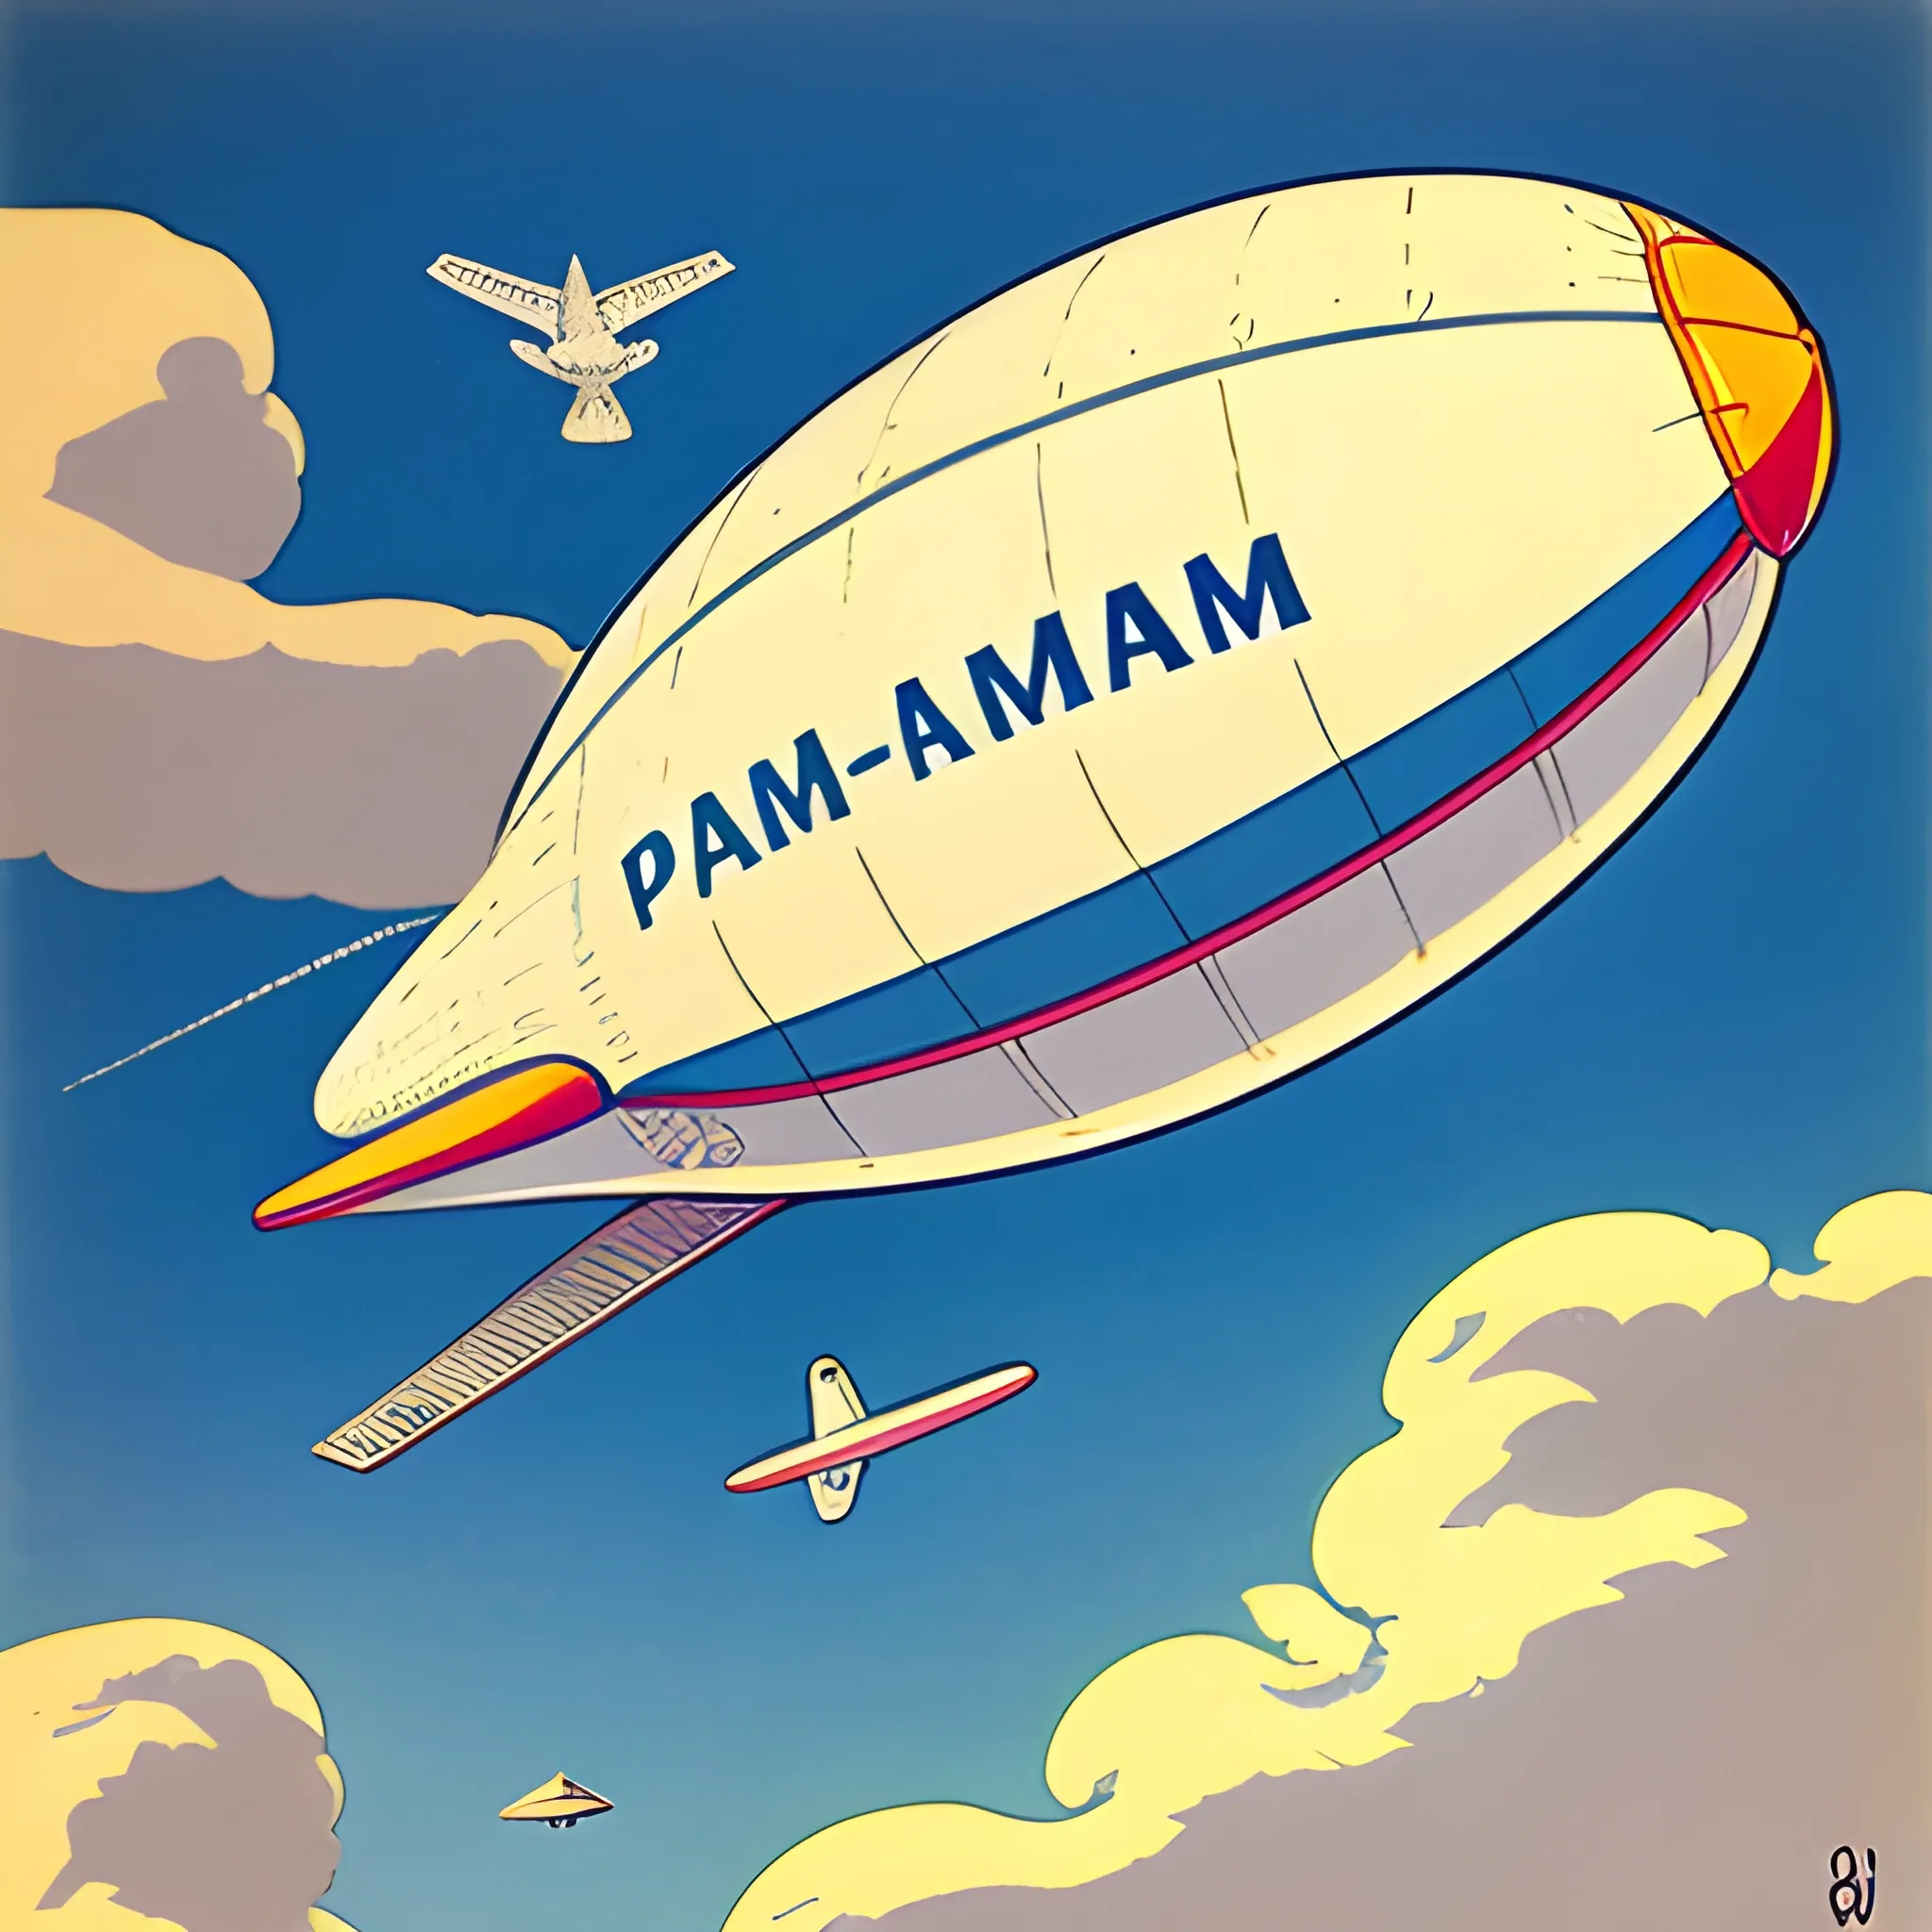 1960's blimp, with thee words ' Pan-Am' across a blimp flying through the clouds, drawn in Jean Giraud's art style, bird's eye view